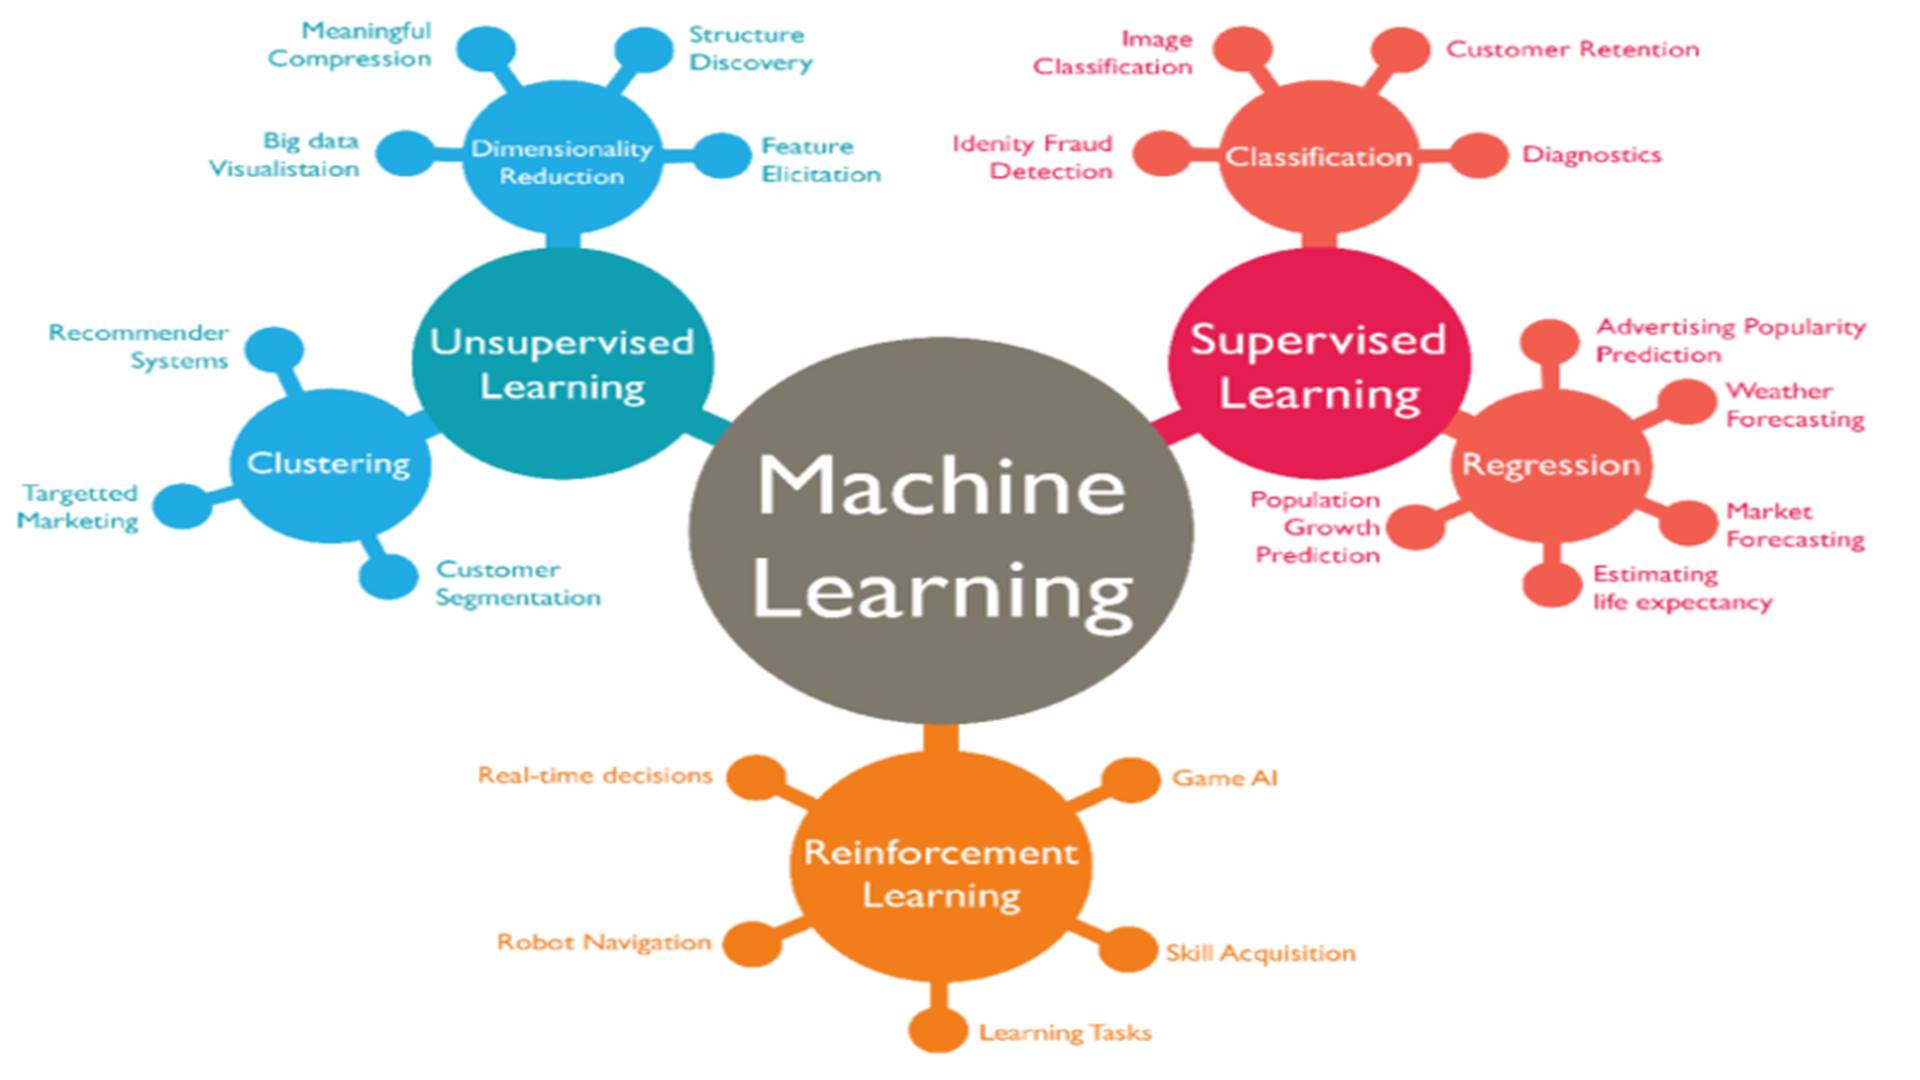 Artificial Intelligence #5 : A taxonomy of machine learning and deep learning algorithms